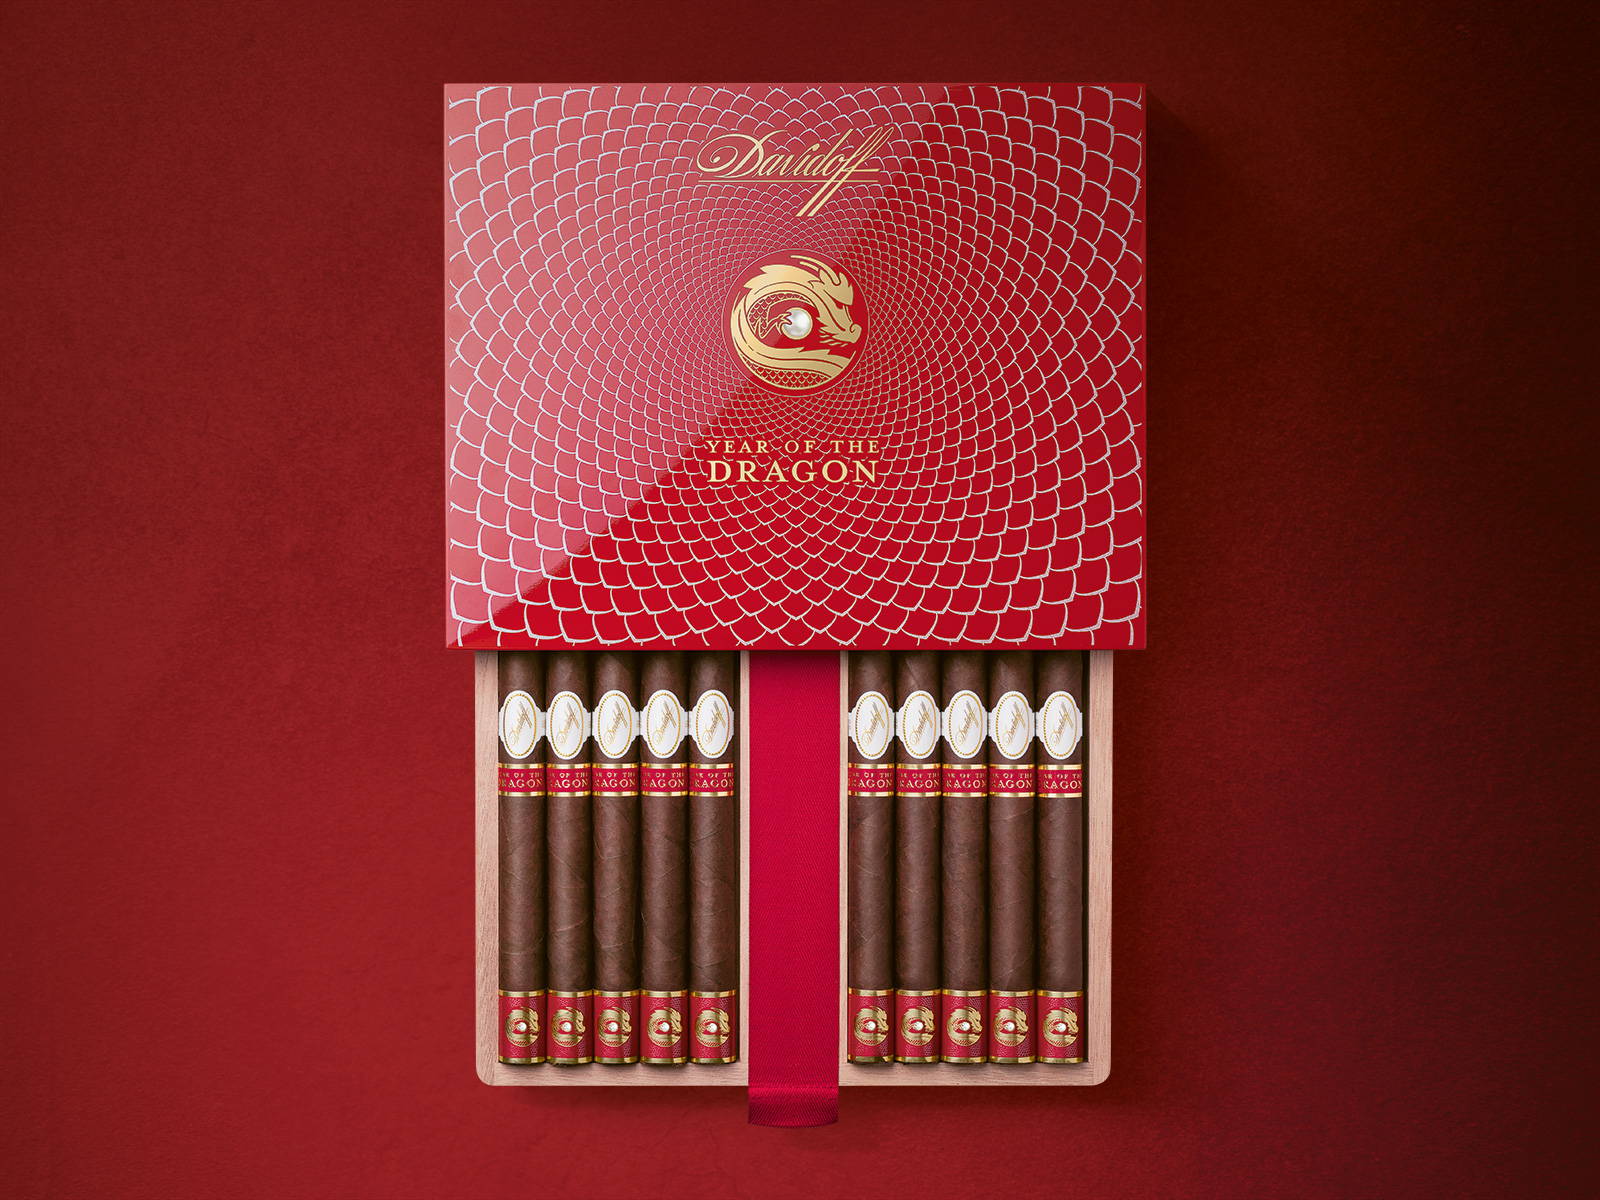 The Davidoff Year of the Dragon Limited Edition Double Corona cigars in their opened box.